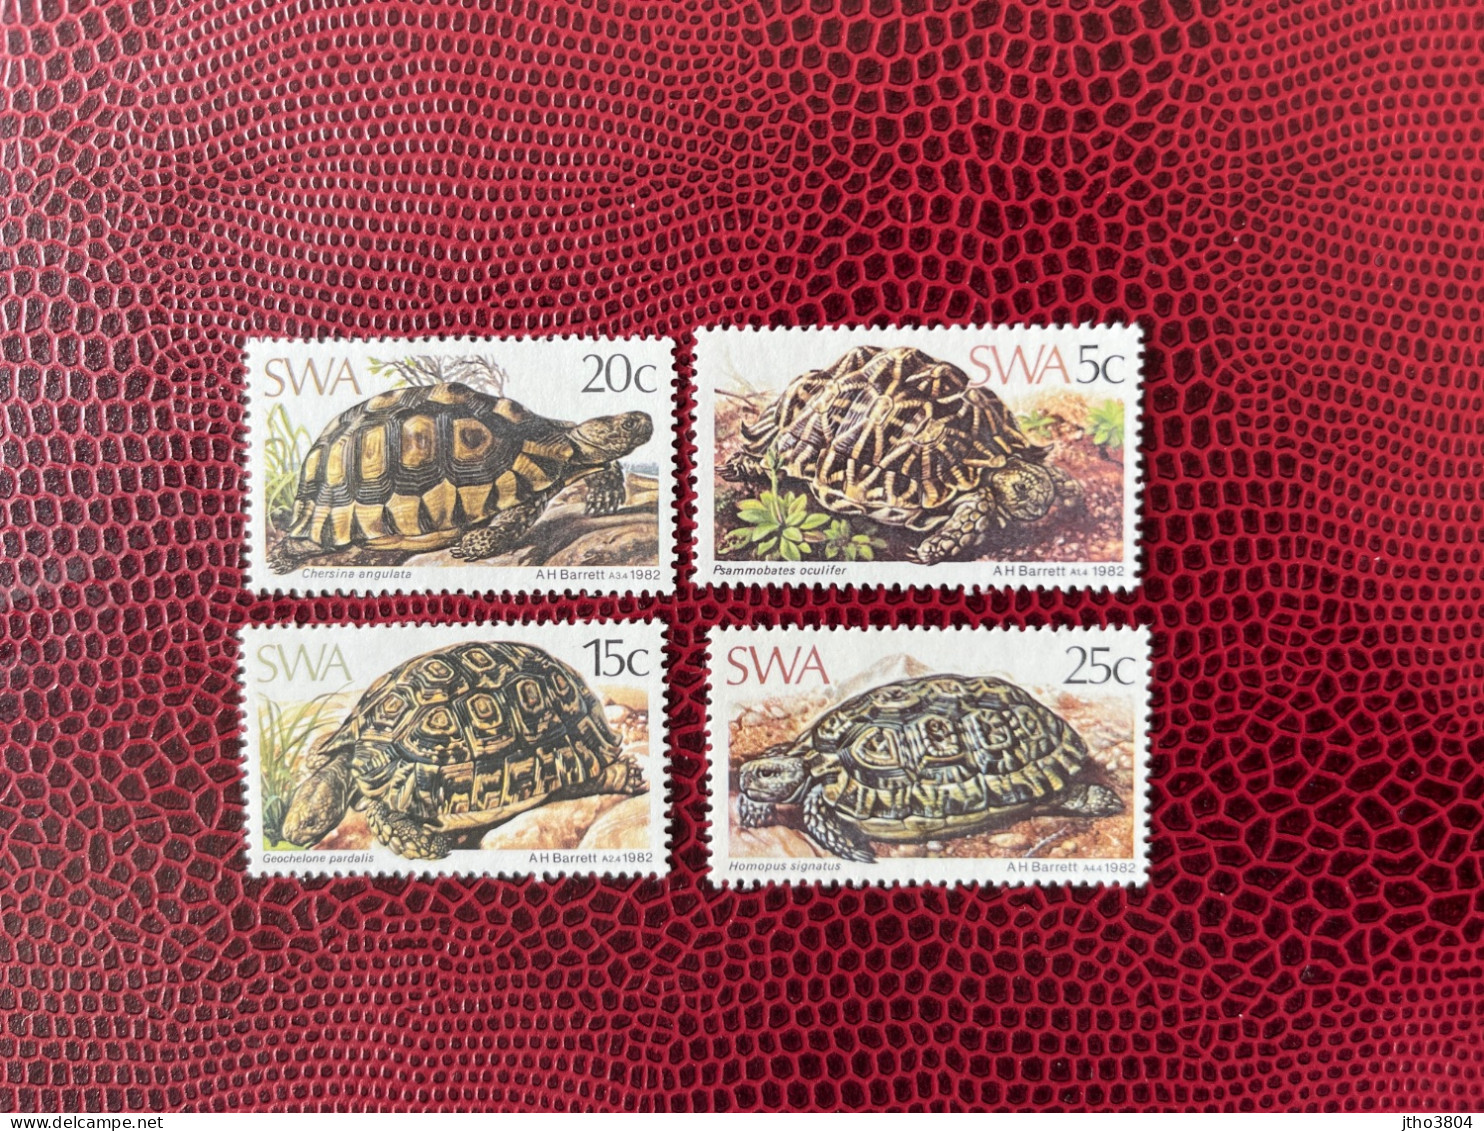 SWA 1982 SUD OUEST AFRICAIN 4v Neuf MNH ** Mi YT 473 476 SOUTH WEST AFRICA - Tortues